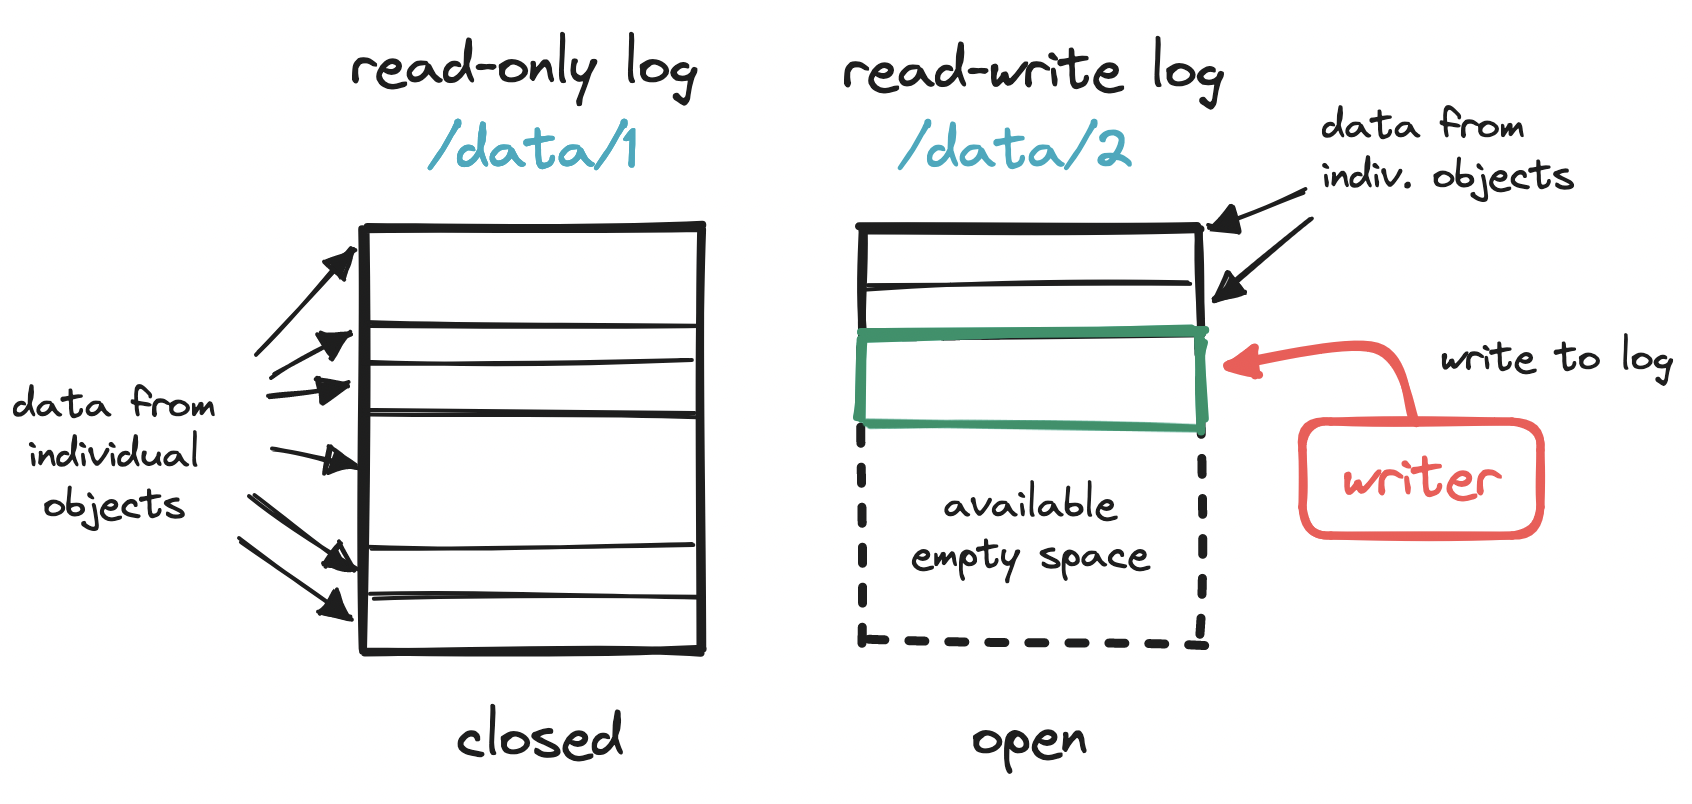 Write-ahead log, closed and open